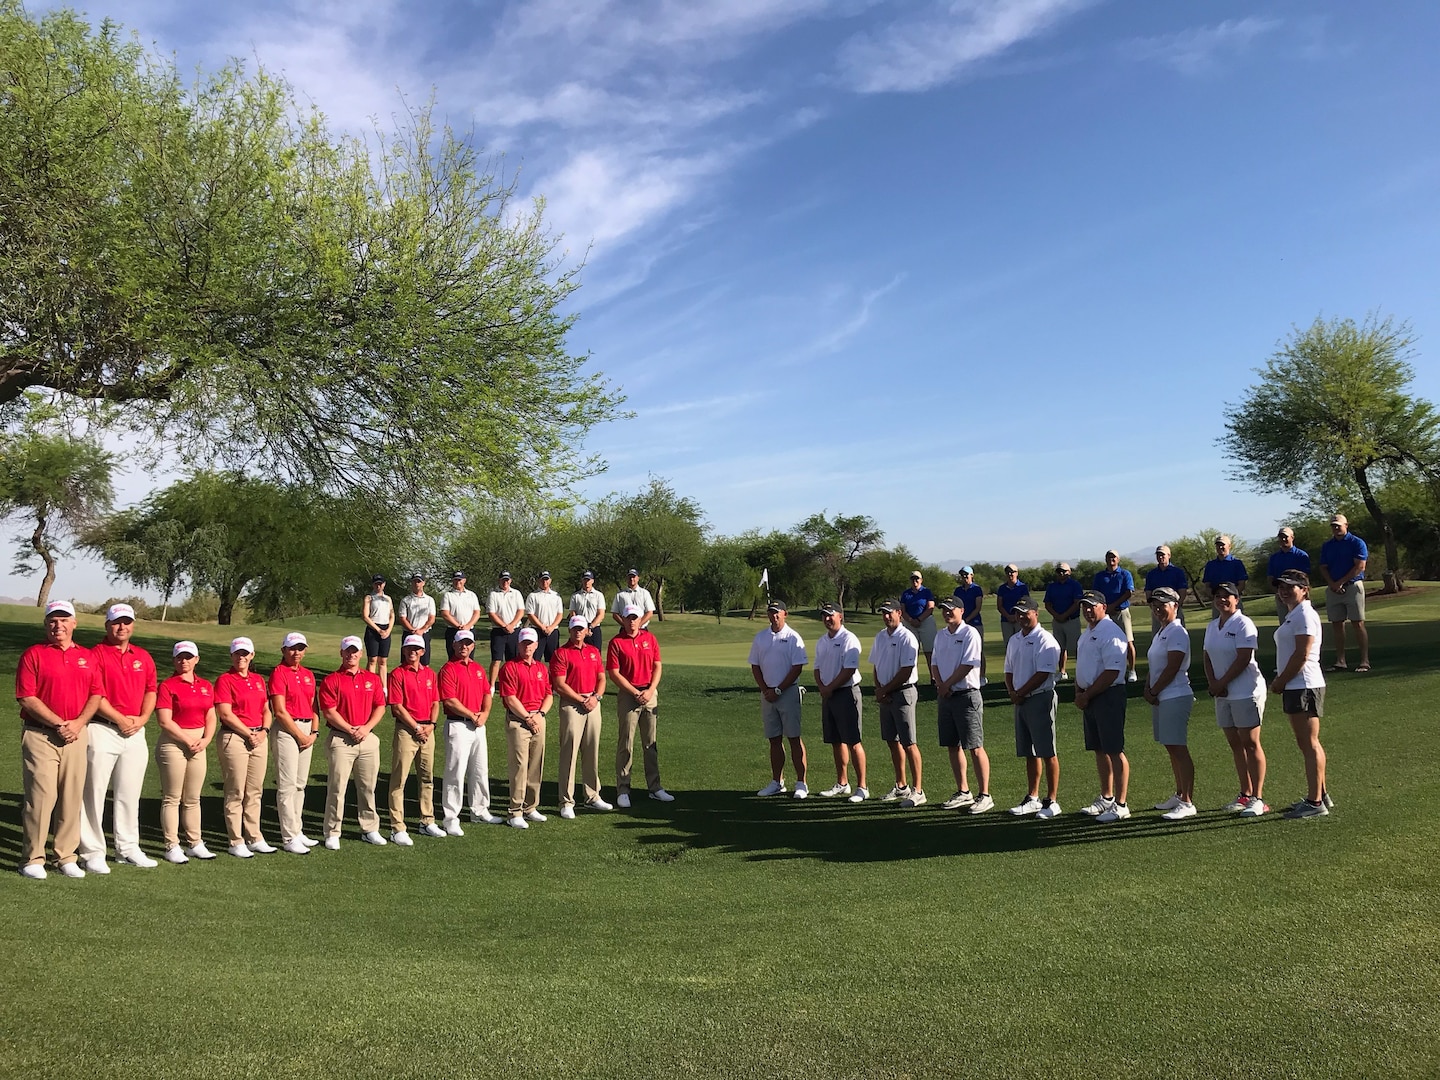 Top golfers from around the Armed Forces converged at the Falcon Dunes Golf Course aboard Luke Air Force Base, Arizona for the 2019 Armed Forces Golf Championship from May 15-18.